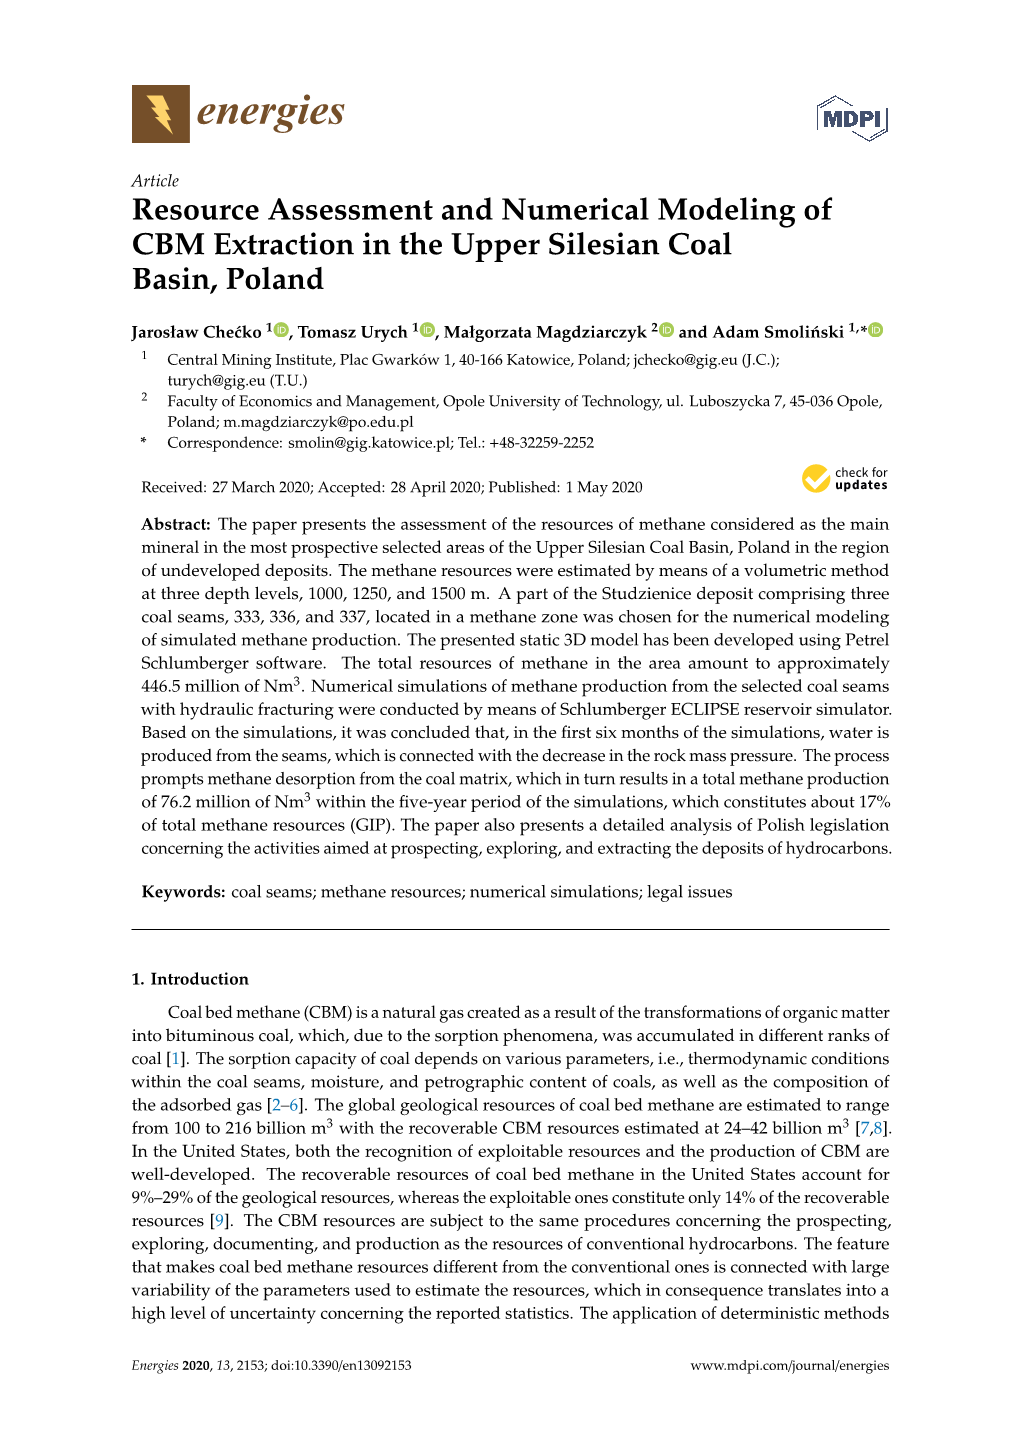 Resource Assessment and Numerical Modeling of CBM Extraction in the Upper Silesian Coal Basin, Poland